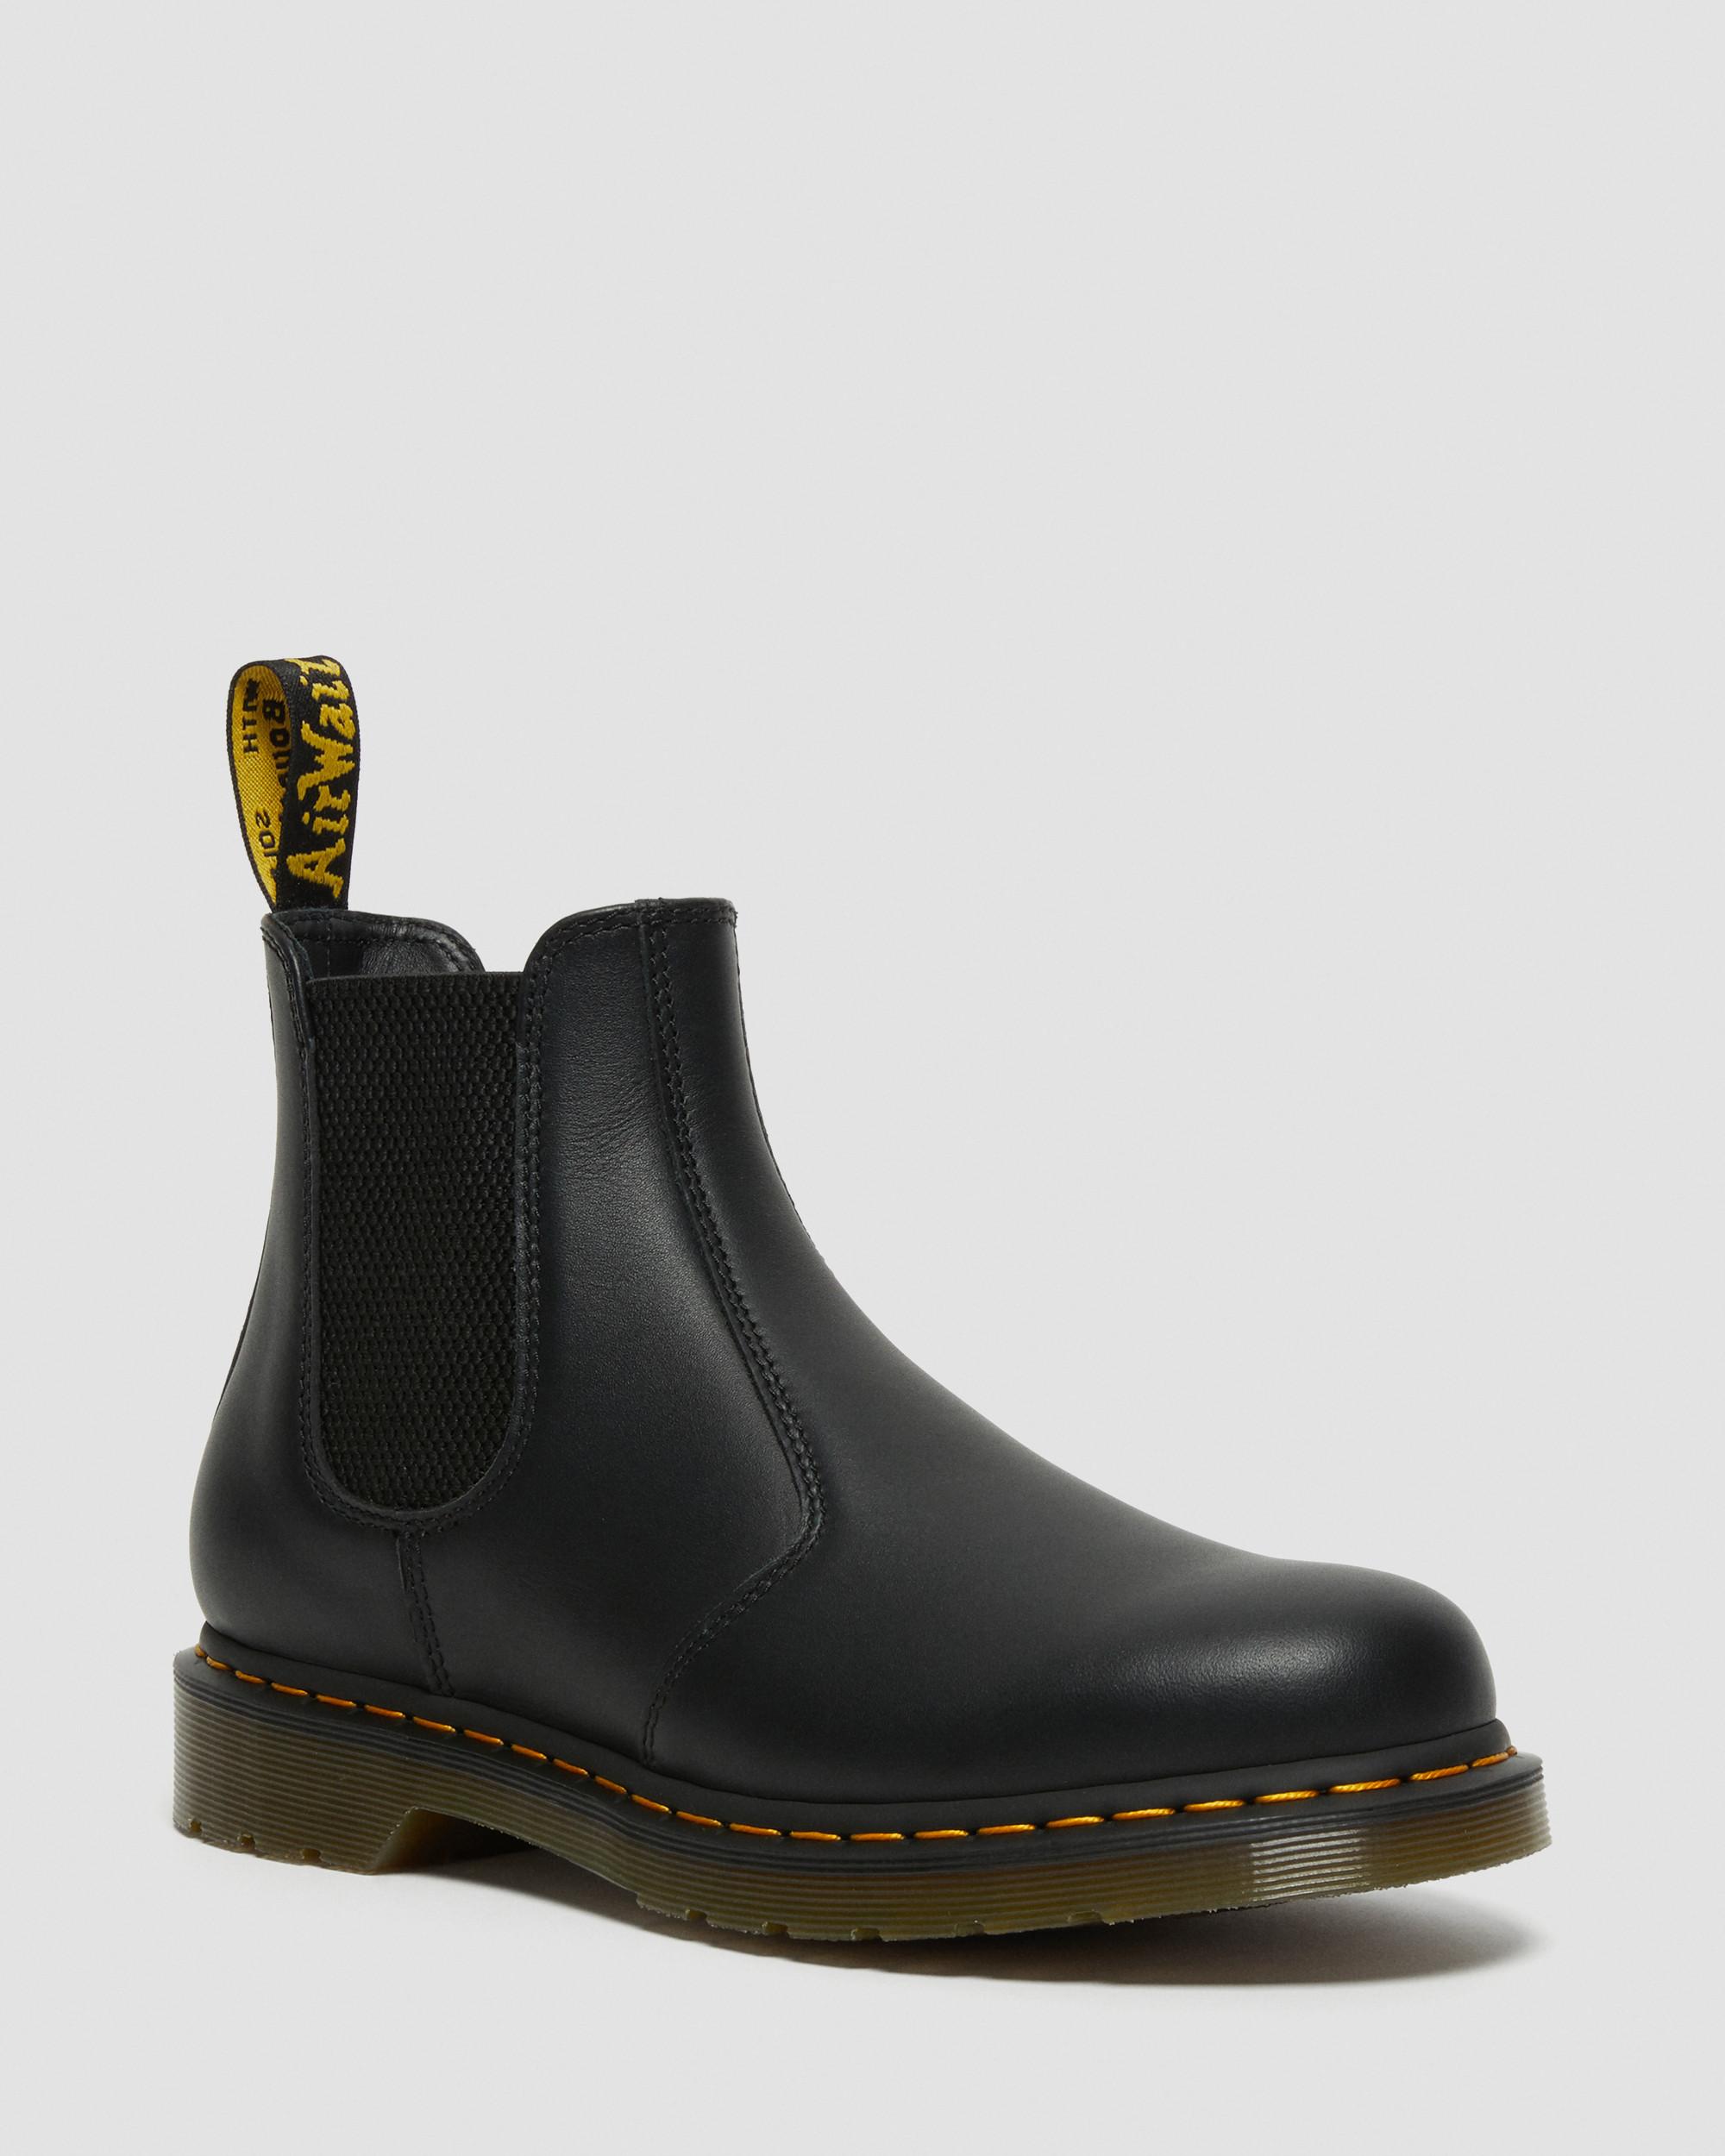 1460 Pascal Bex Exposed Steel Toe Lace Up Boots, Black | Dr. Martens